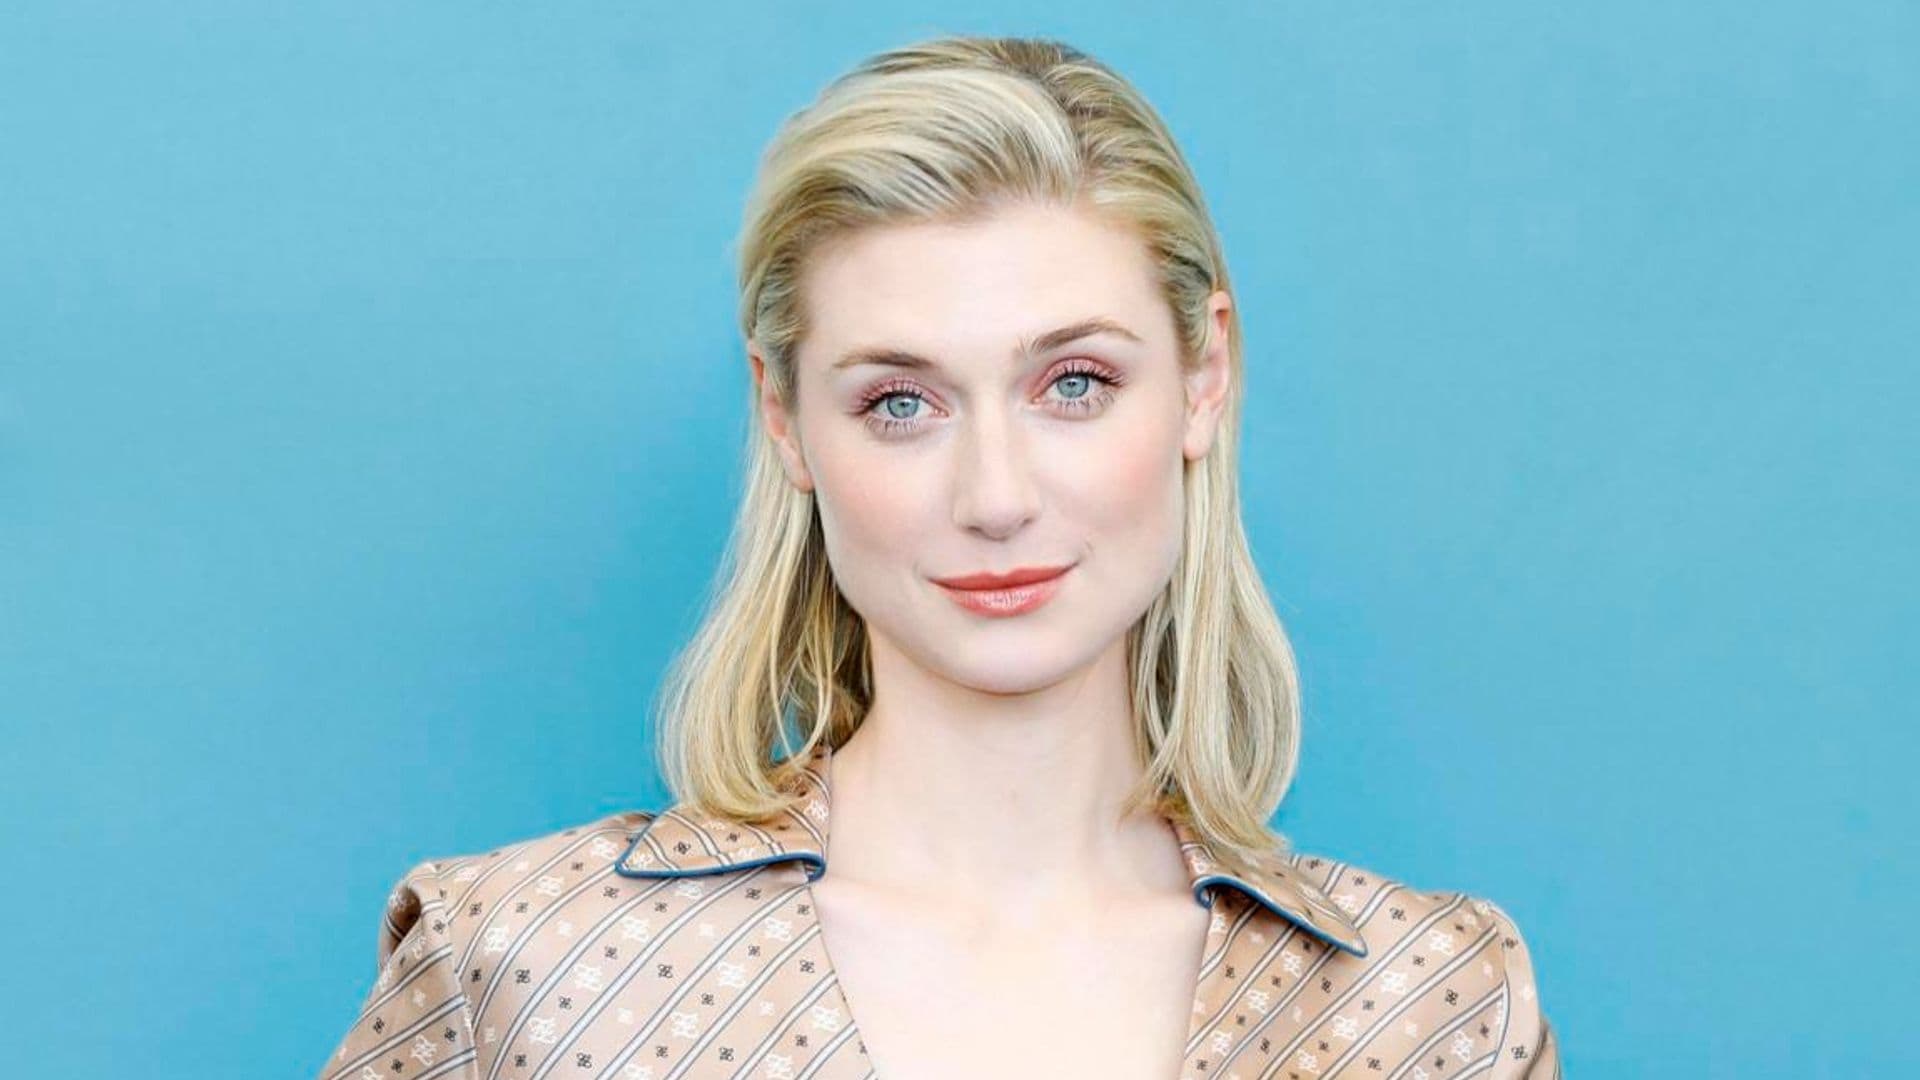 Elizabeth Debicki Will Play Princess Diana In The Final Two Seasons Of ‘The Crown’